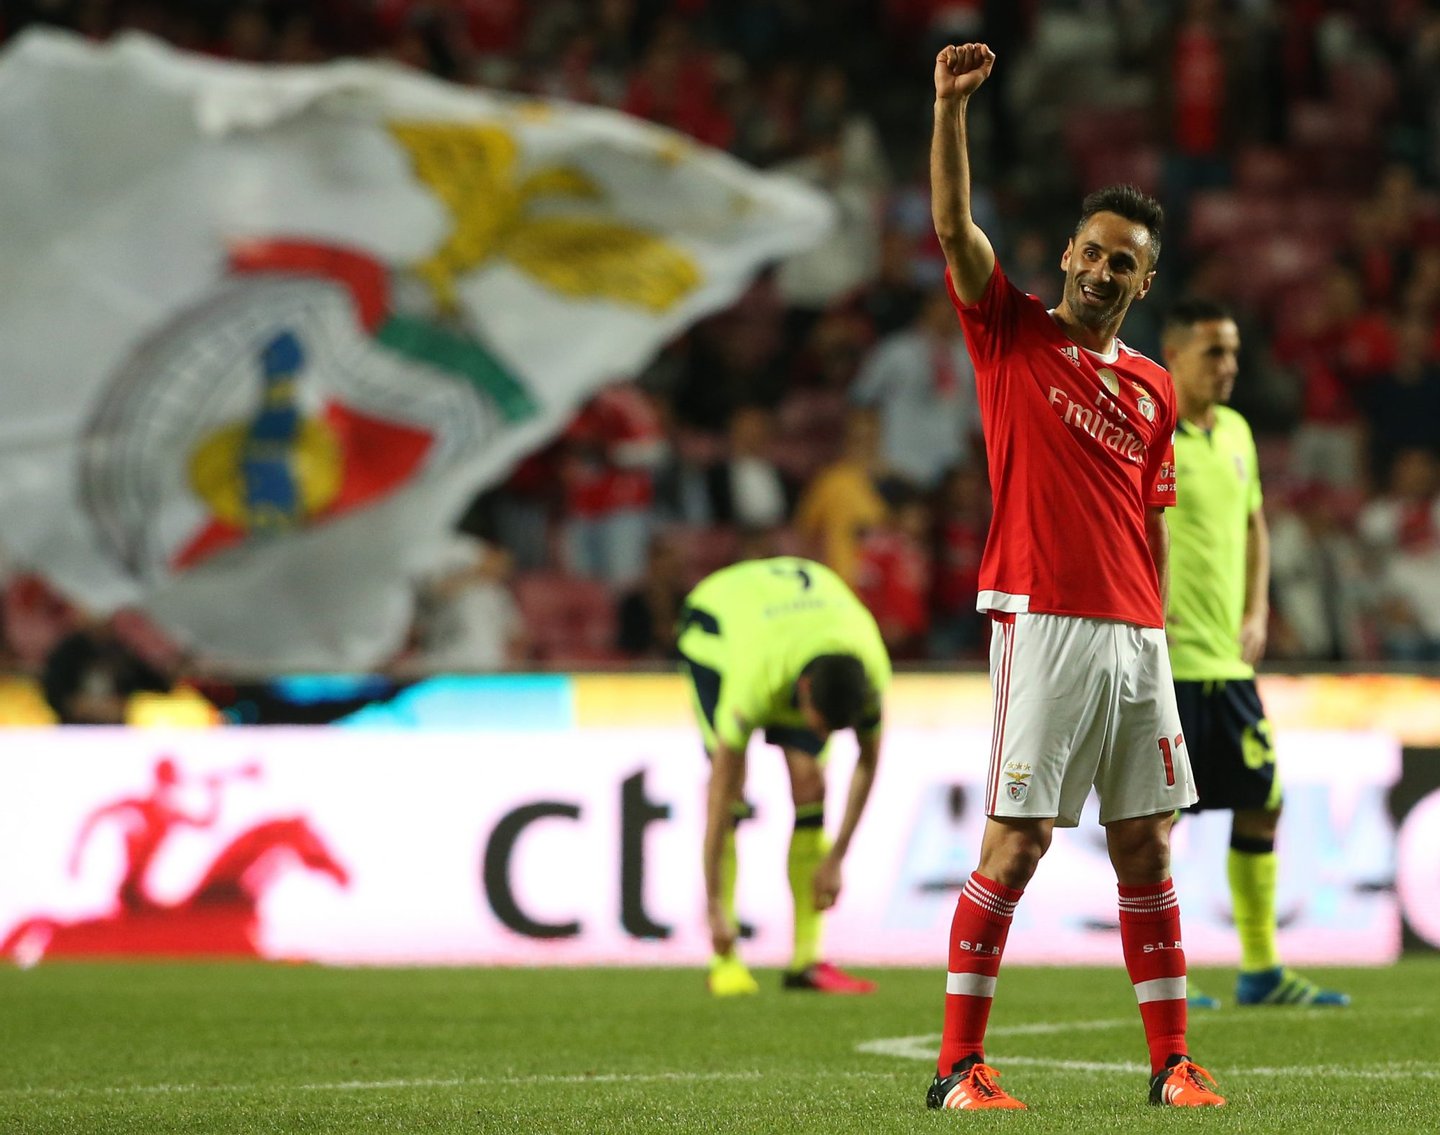 LISBON, PORTUGAL - MAY 2: SL Benfica's forward from Brazil Jonas celebrates after scoring a goal during the Taca CTT match between SL Benfica and SC Braga at Estadio da Luz on May 2, 2016 in Lisbon, Portugal. (Photo by Gualter Fatia/Getty Images)